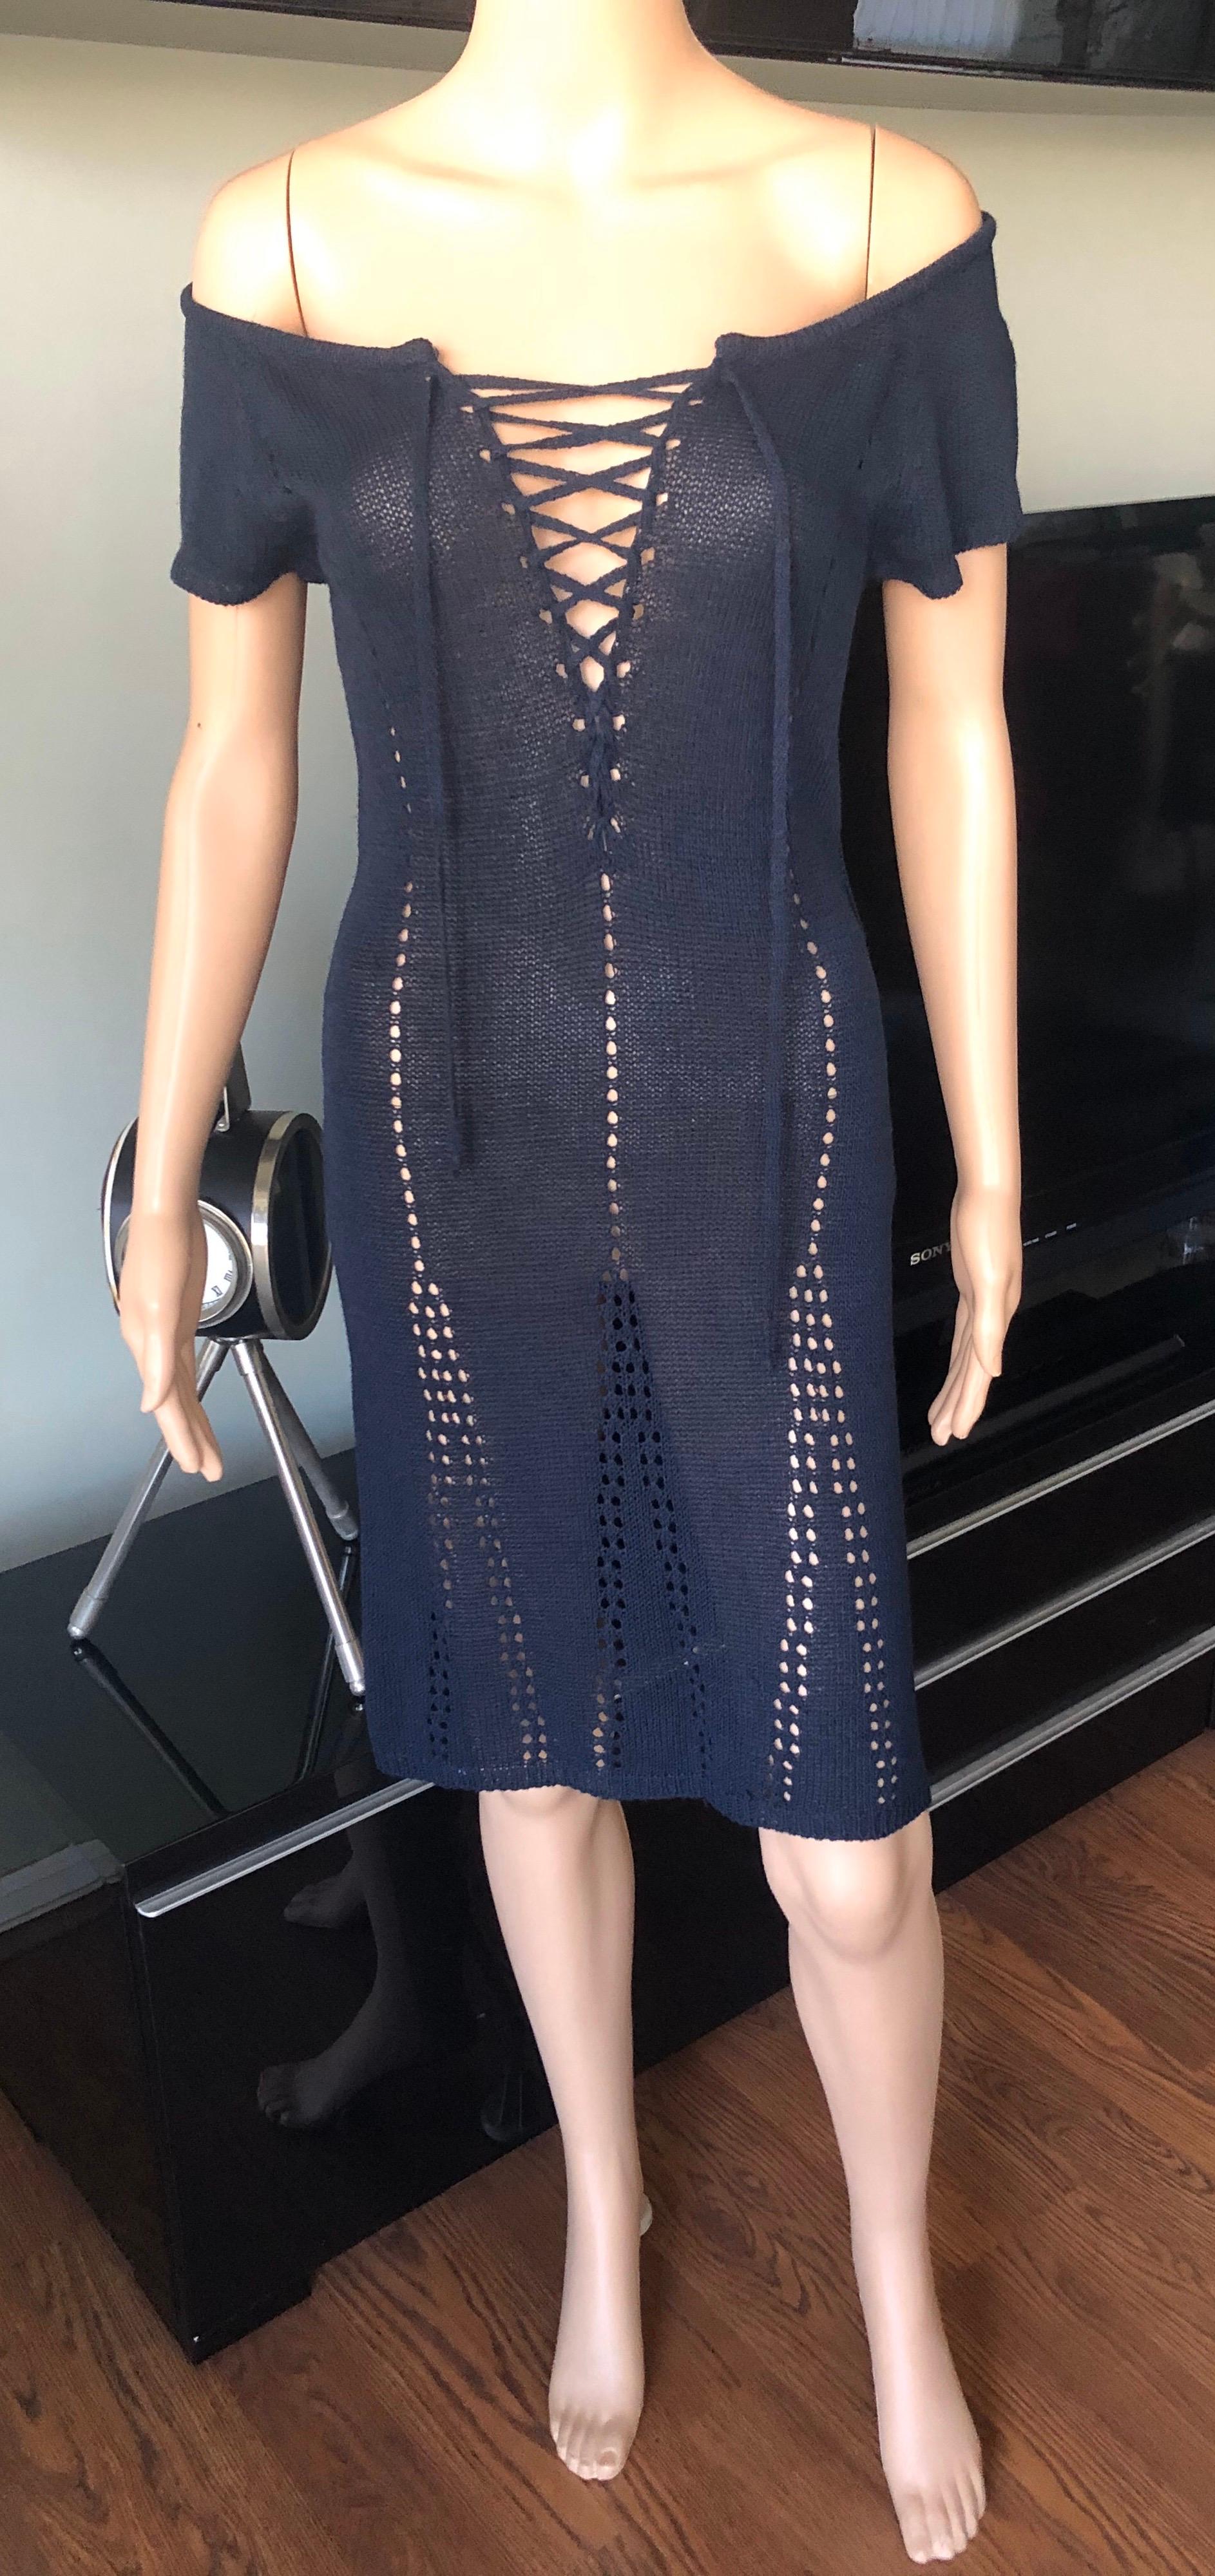 Tom Ford for Gucci S/S 1995 Vintage Lace Up Off Shoulder Crochet Knit Dress In Good Condition For Sale In Naples, FL